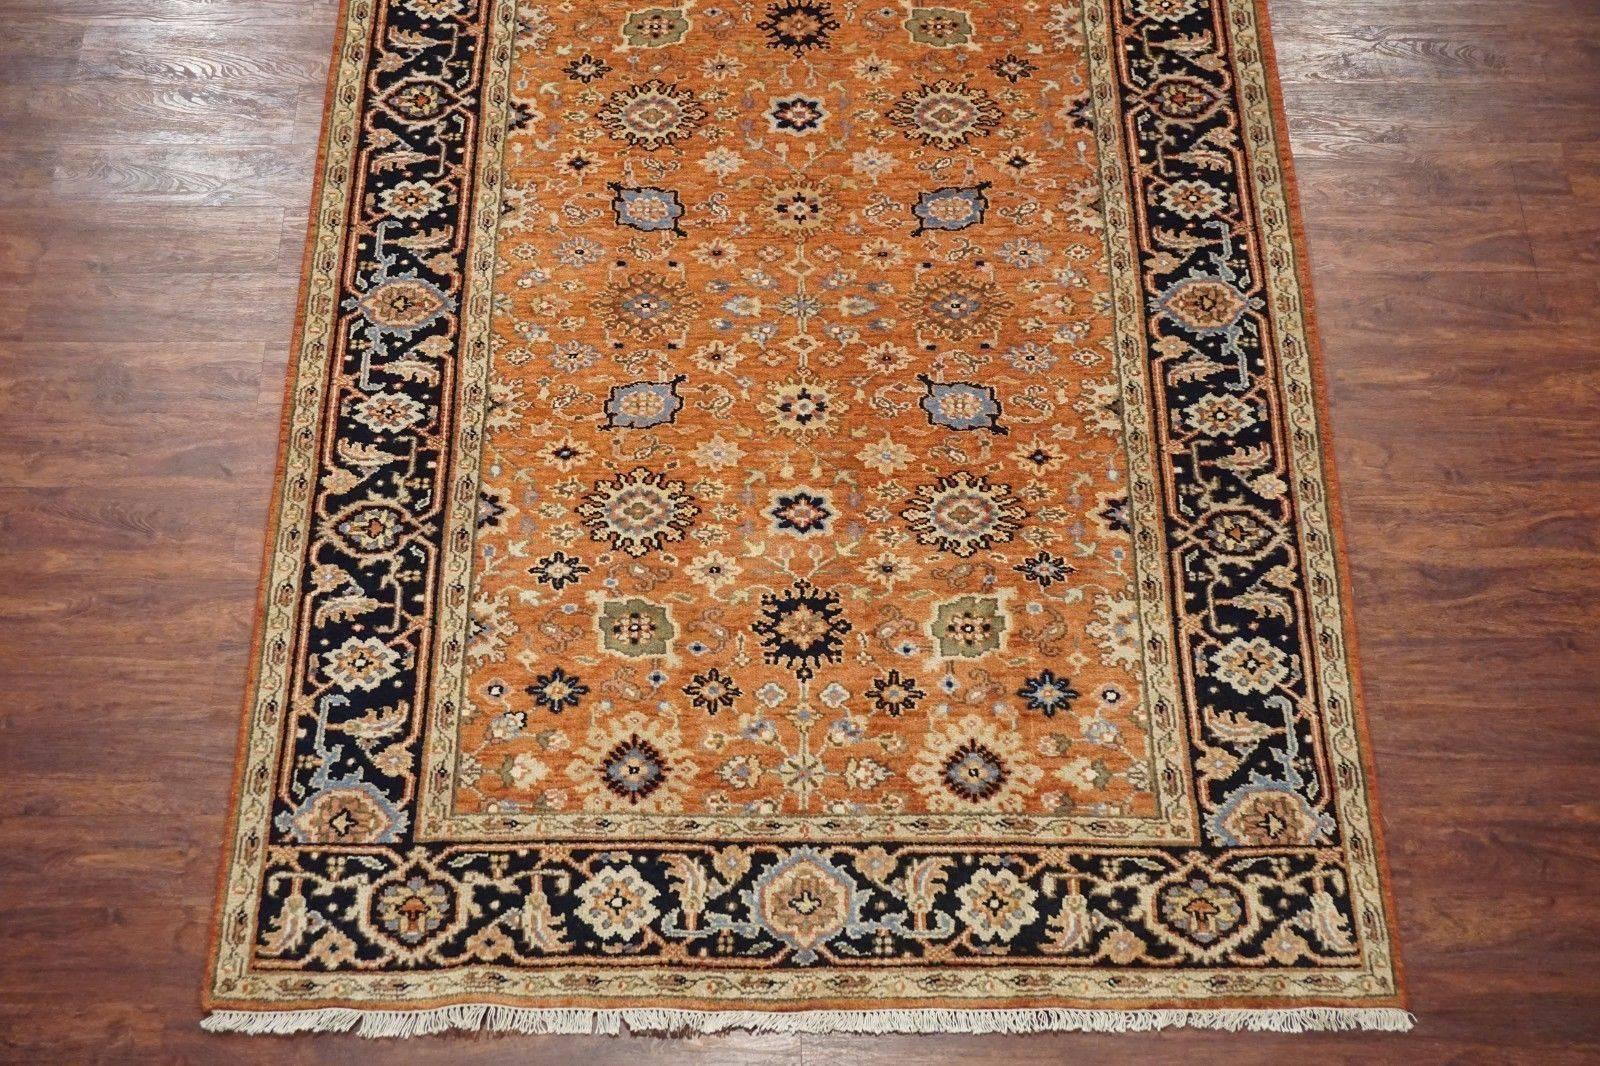 Vegetable Dyed Mahal Sultanabad area rug

circa 2010

Measures: 6' 1